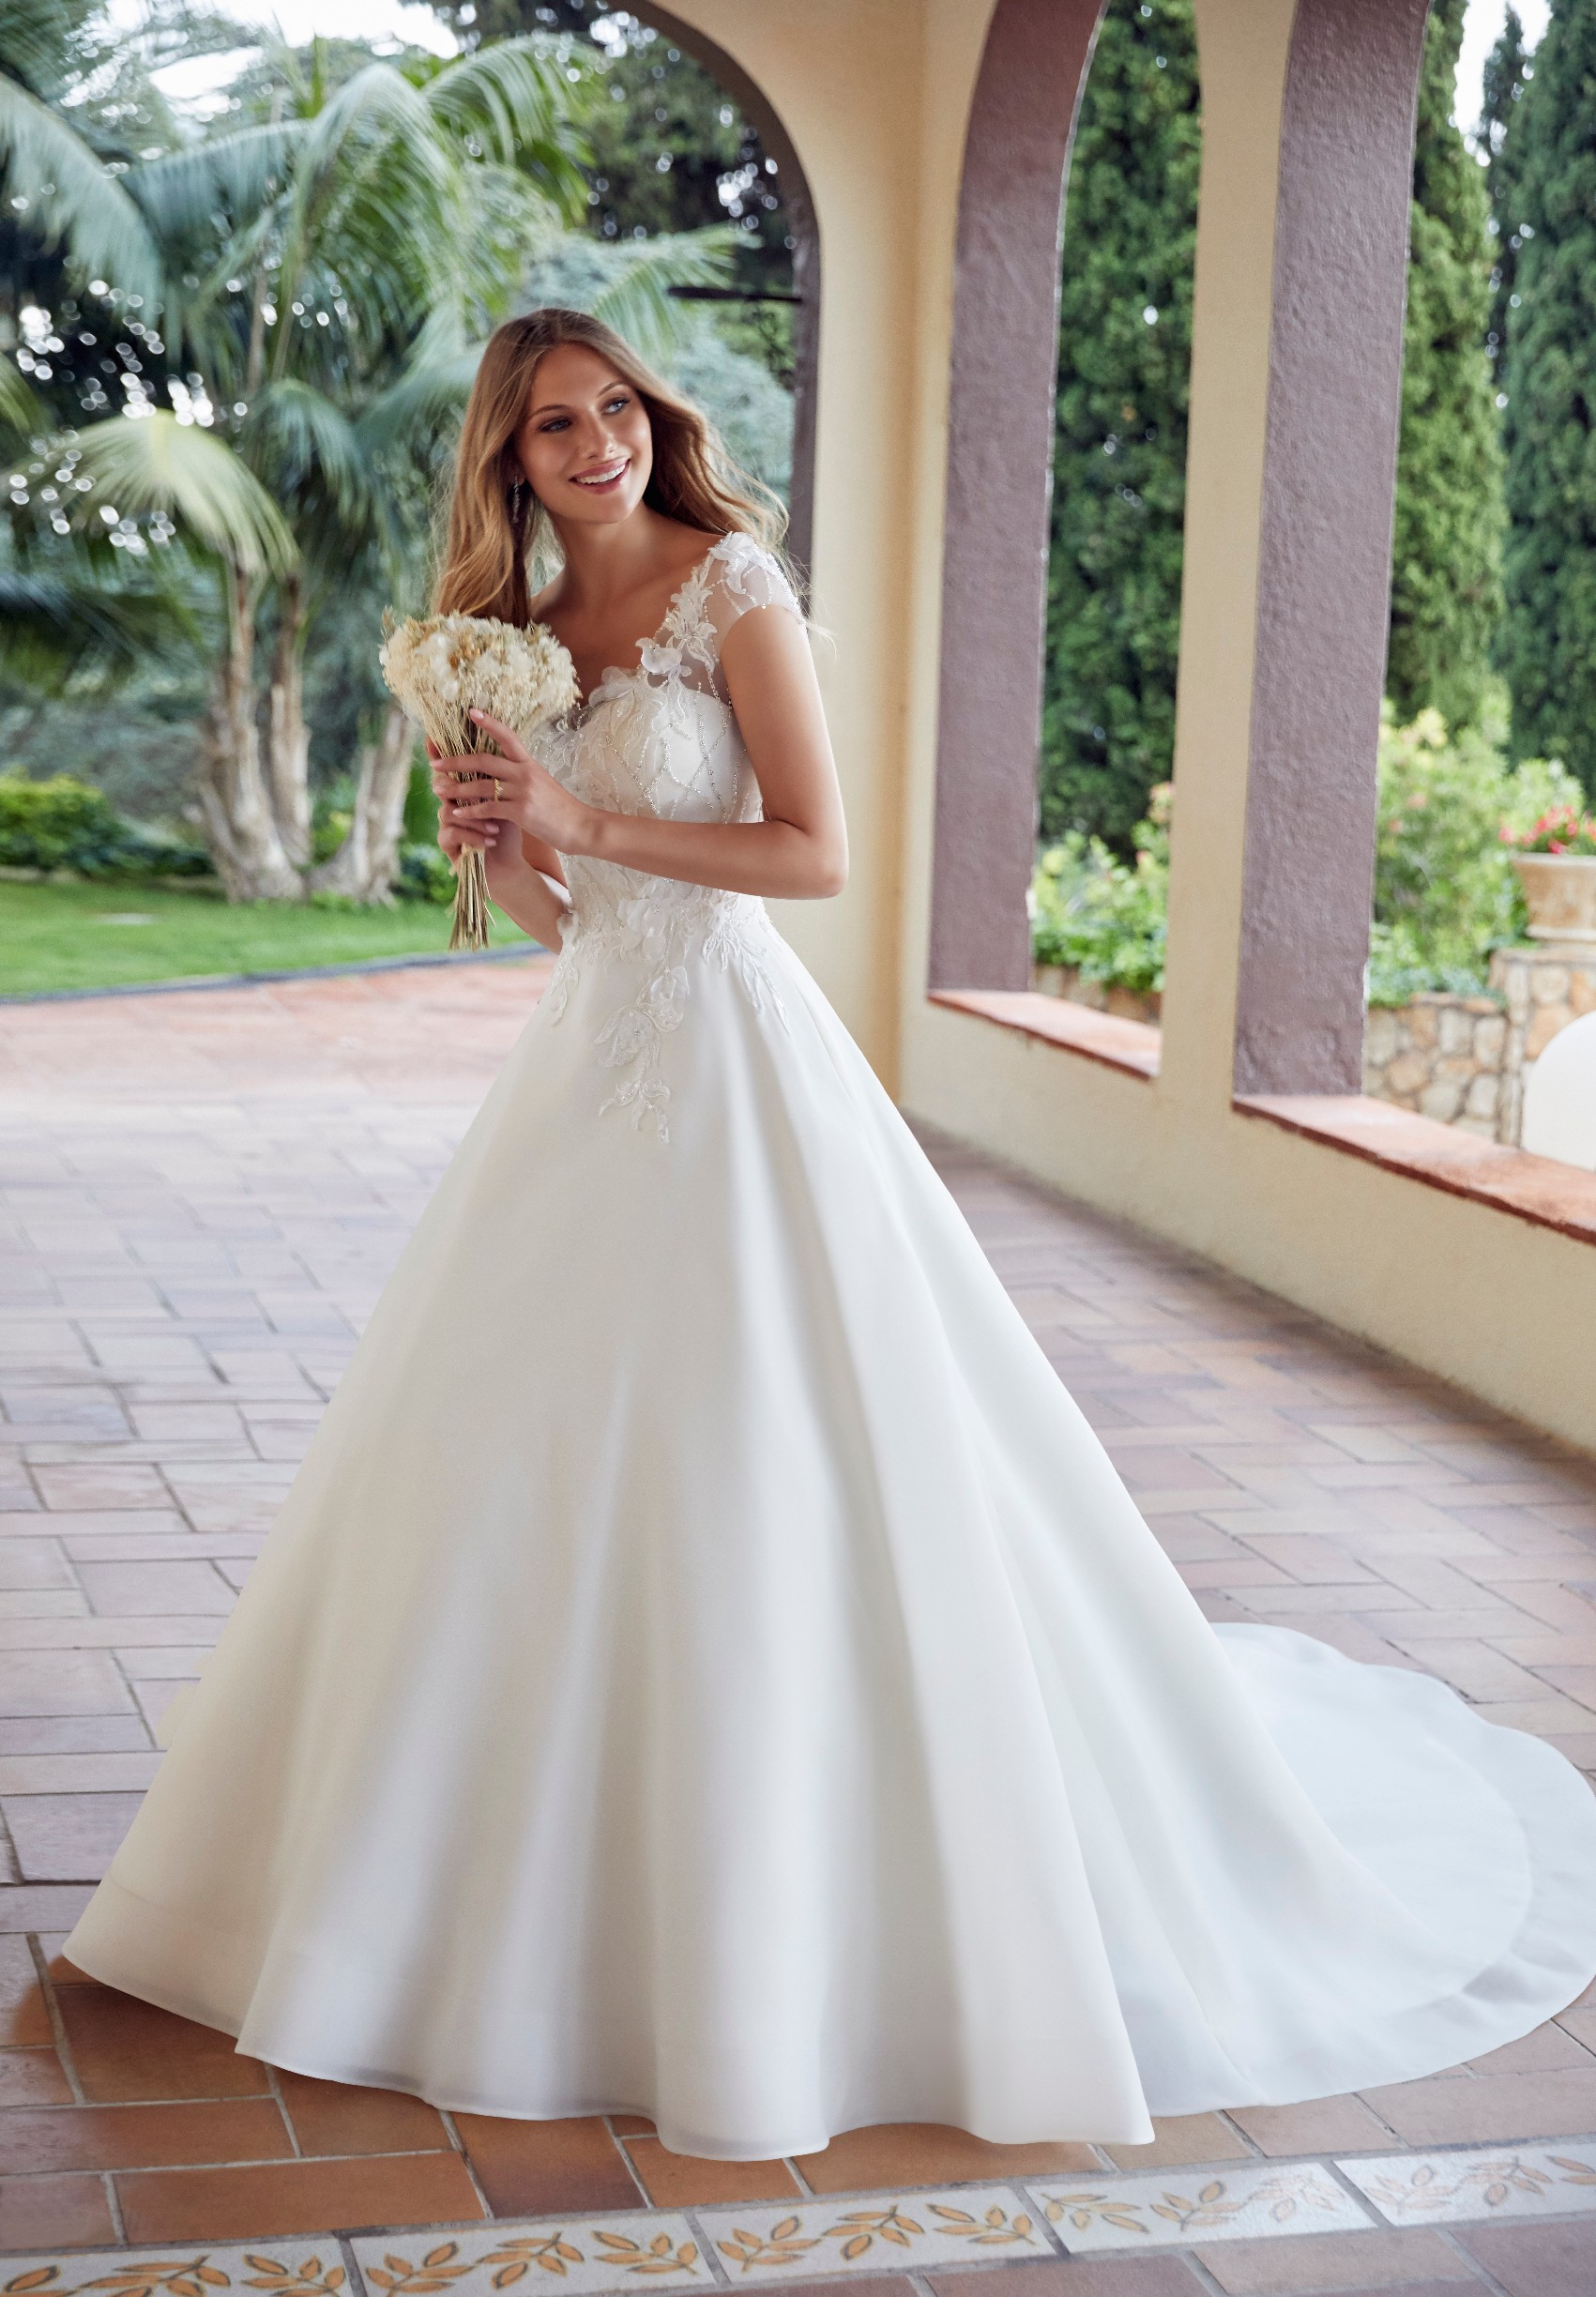 Model stood on a terracotta path by trees in Ronald Joyce 69502, an ivory ballgown wedding dress with a v-neckline, beaded tulle off-the-shoulder cap sleeves and a beaded bodice